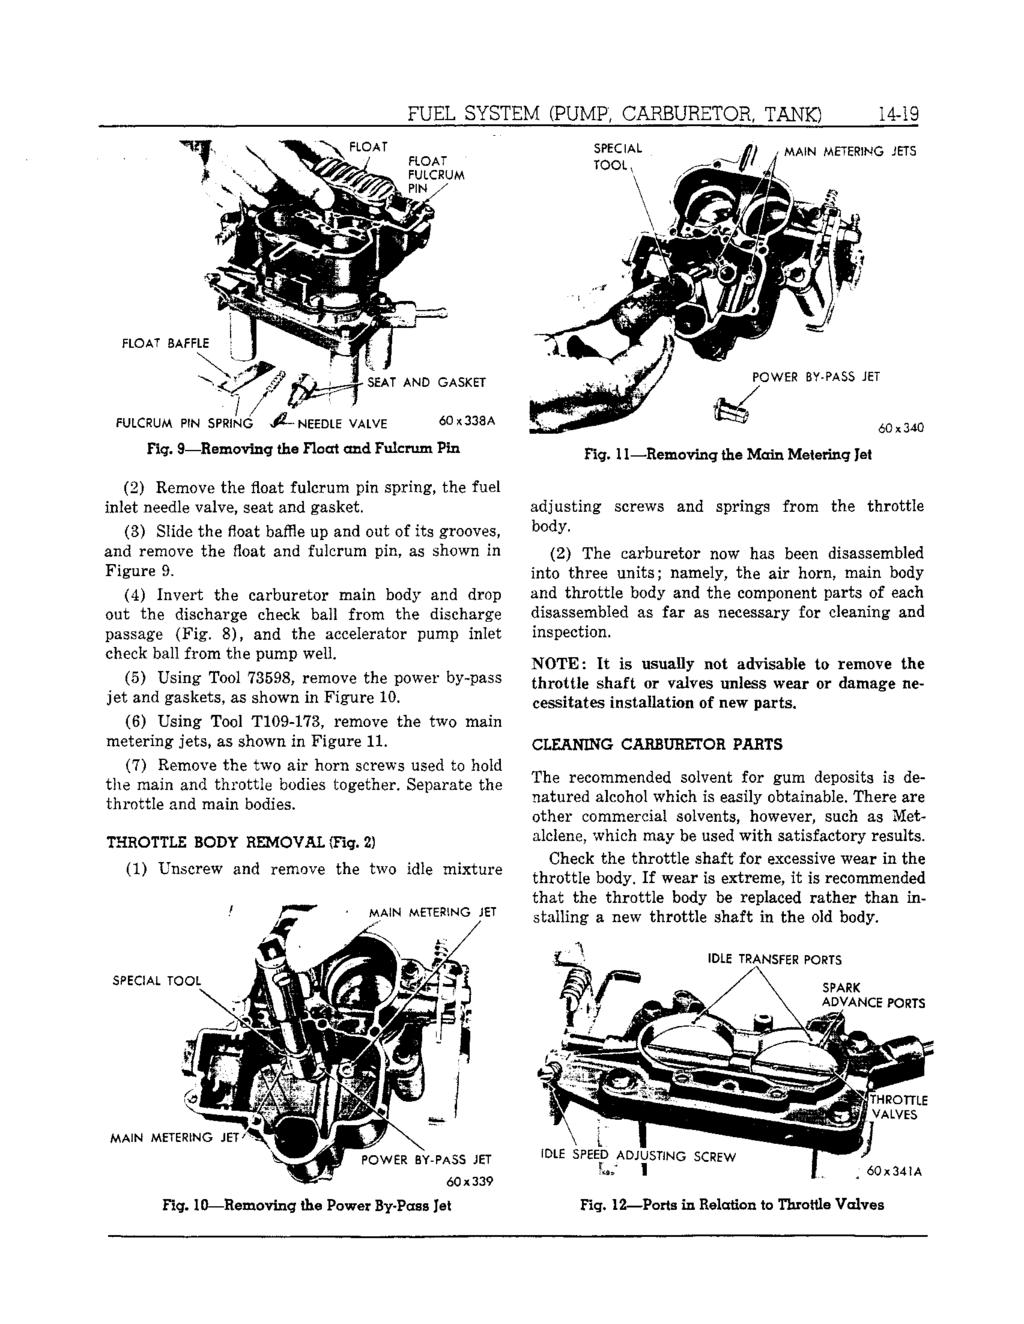 FUEL SYSTEM (PUMP; CARBURETOR, TANK) 14-19 Fig. 9 Removing the Float and Fulcrum Pin (2) Remove the float fulcrum pin spring, the fuel inlet needle valve, seat and gasket.